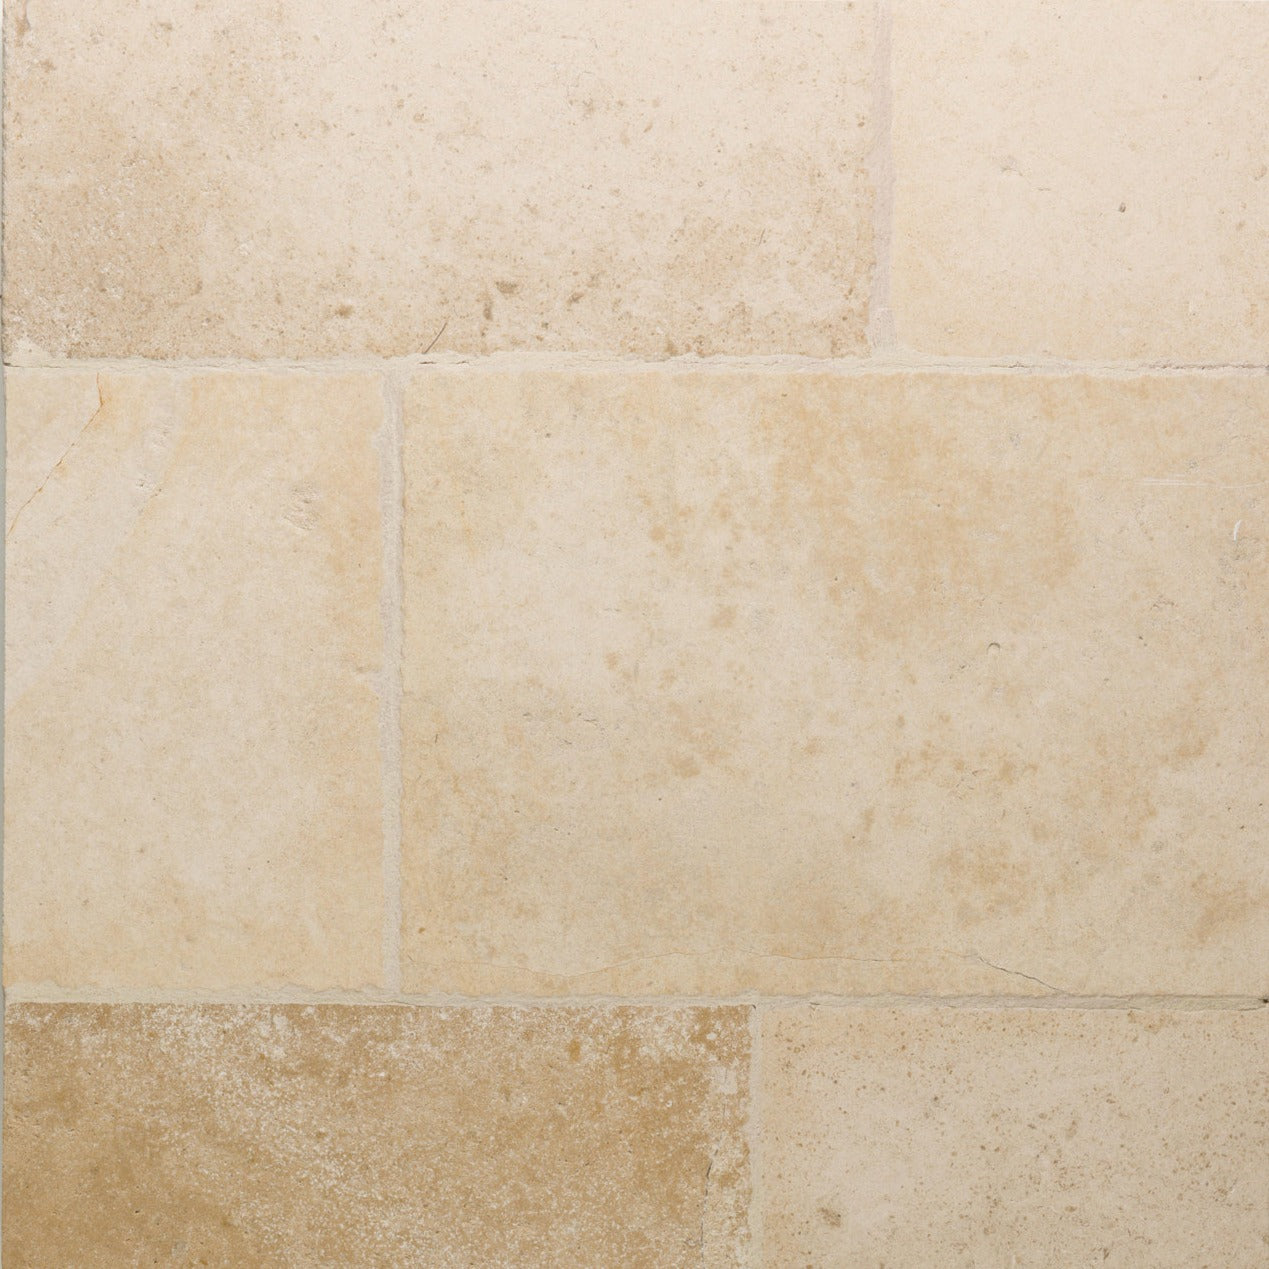 haussmann bordeaux beige natural limestone old bourgogne interior pattern patine chiseled edge 5_8 inch thick